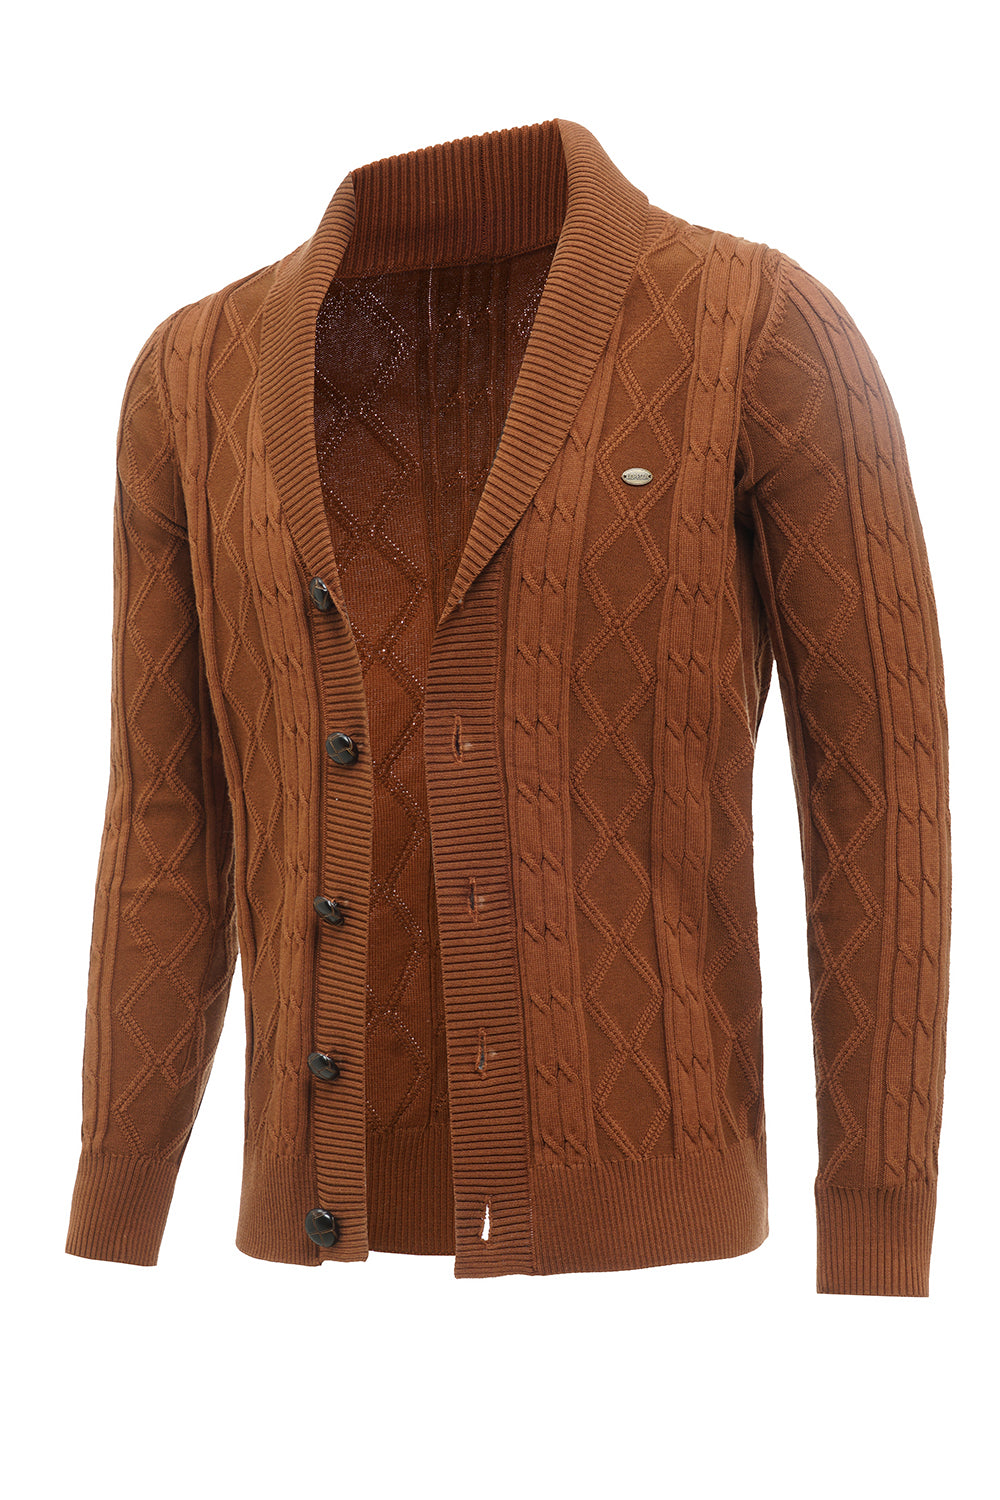 Brown Cable Knitted Long Sleeves Men's Cardigan Sweater